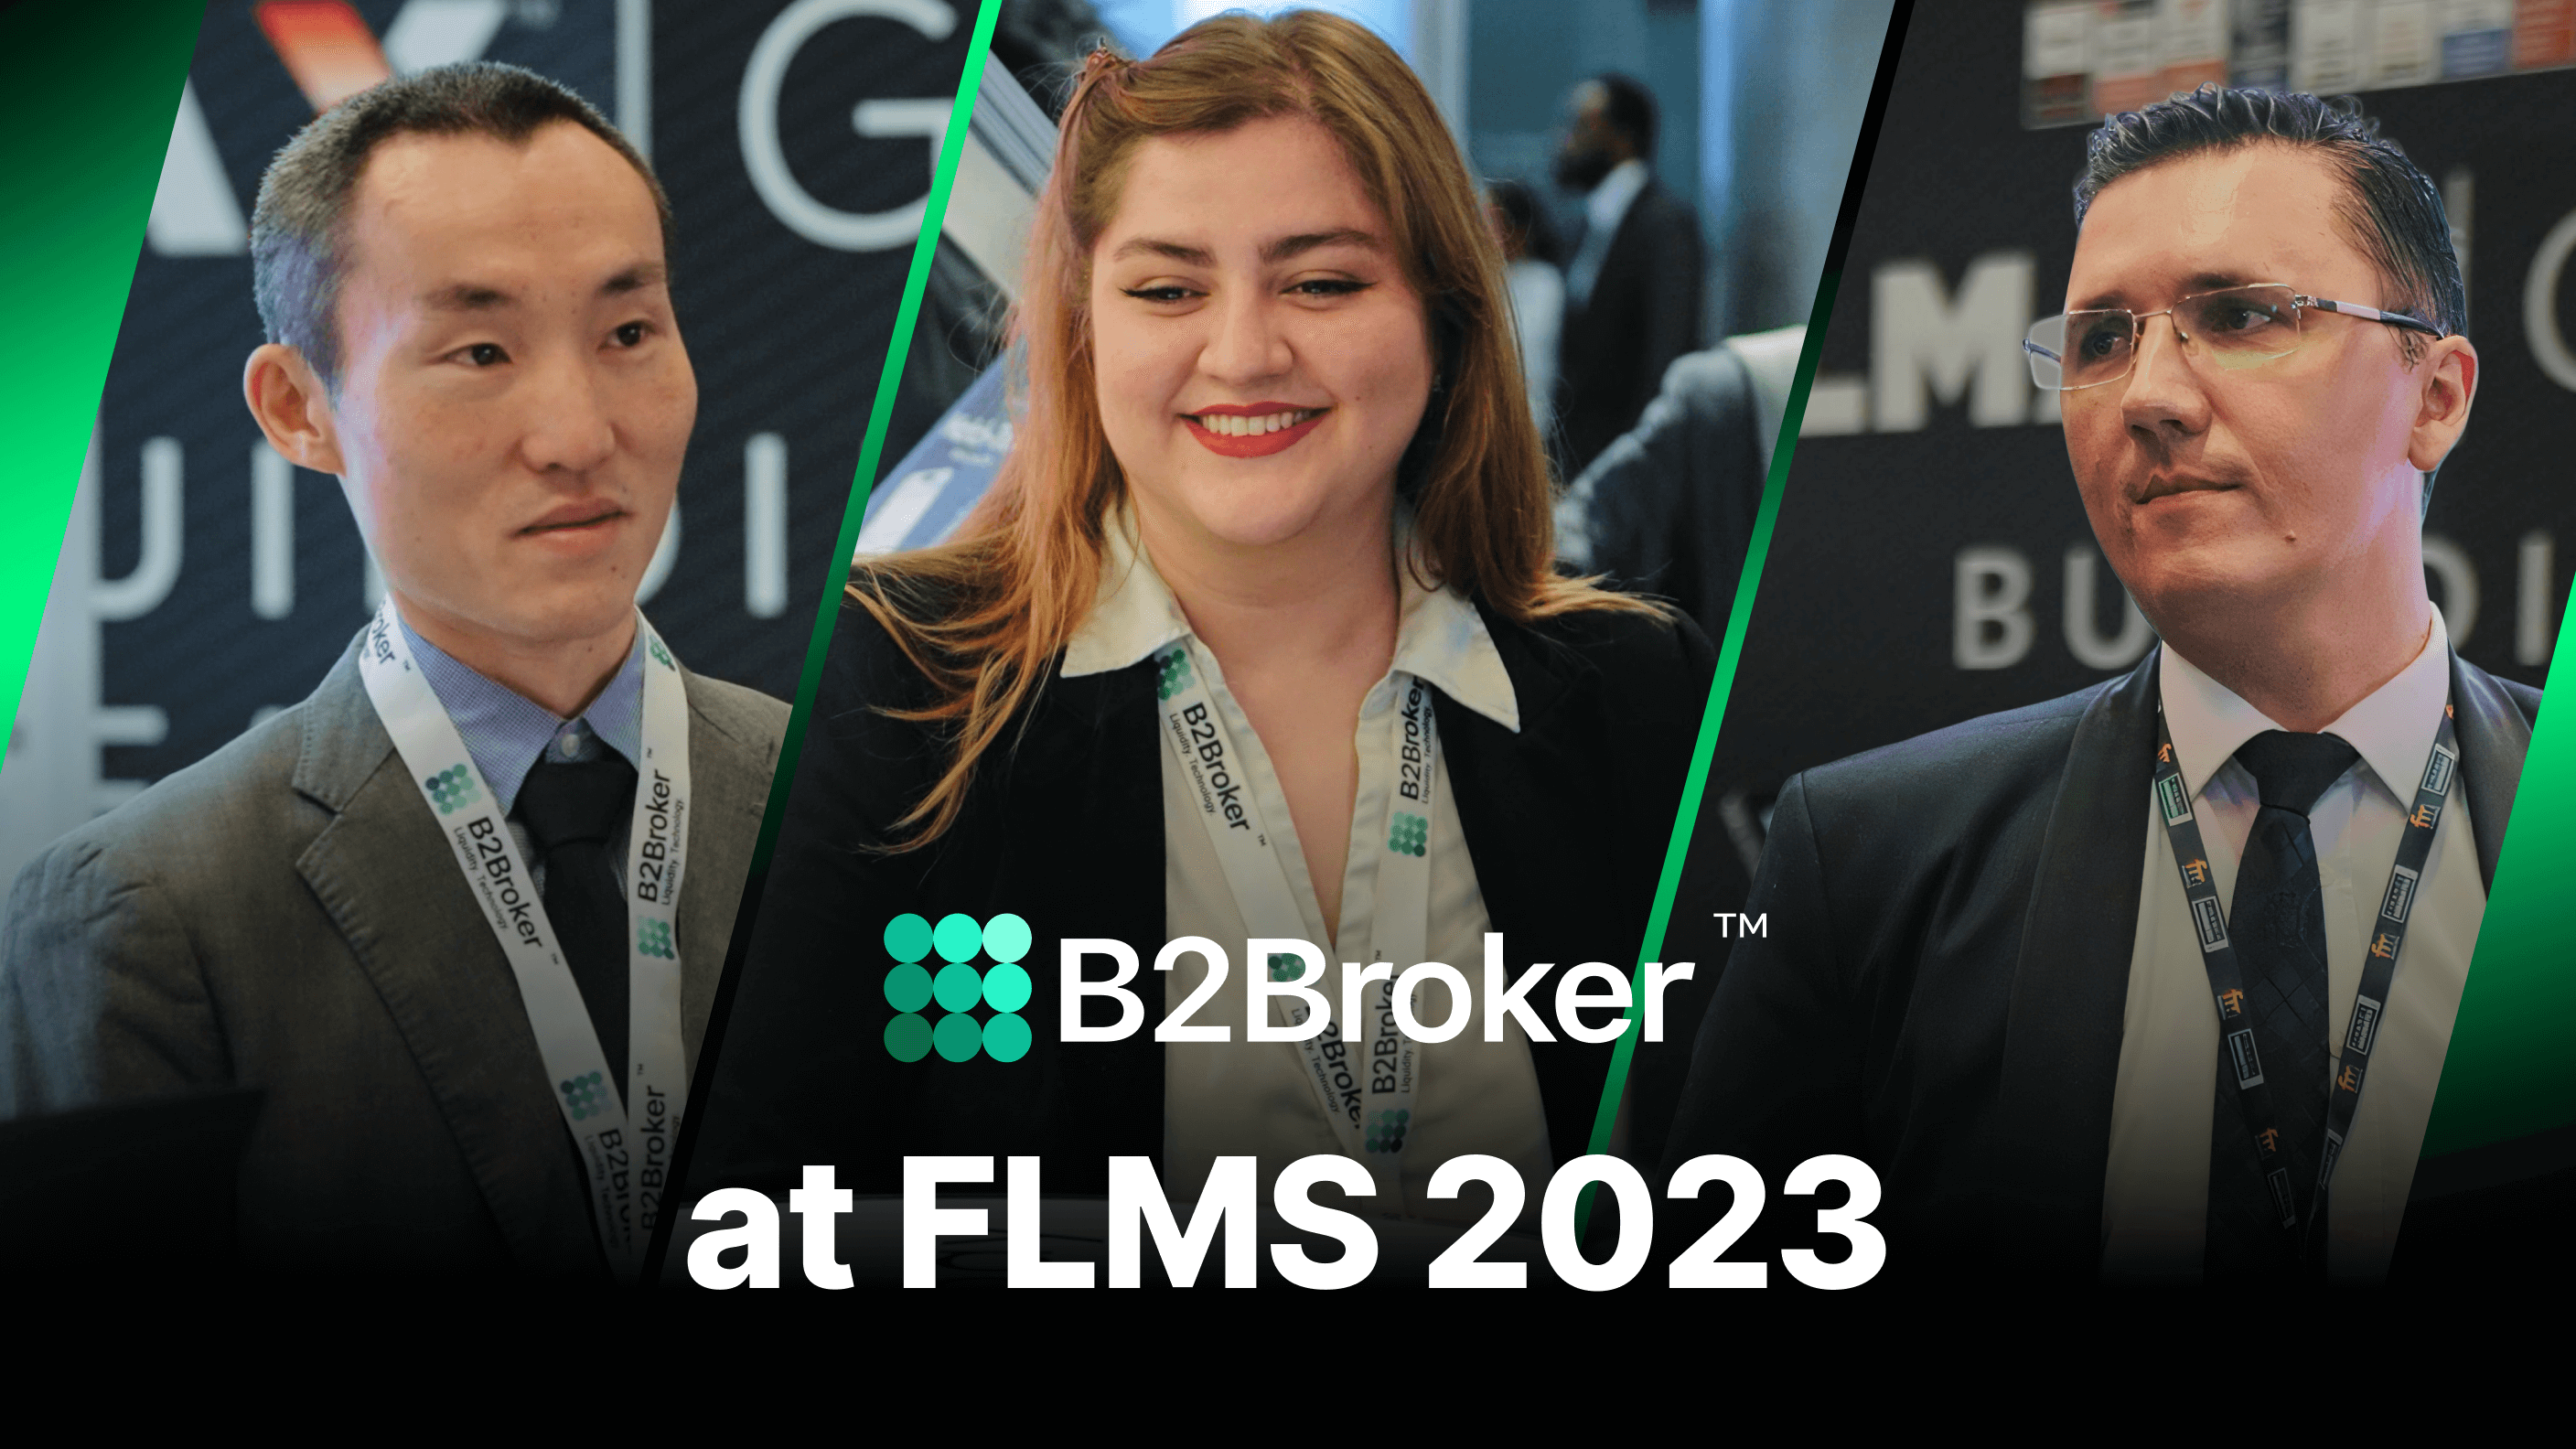 Highlights from B2Broker’s Exciting Adventure at FMLS 2023